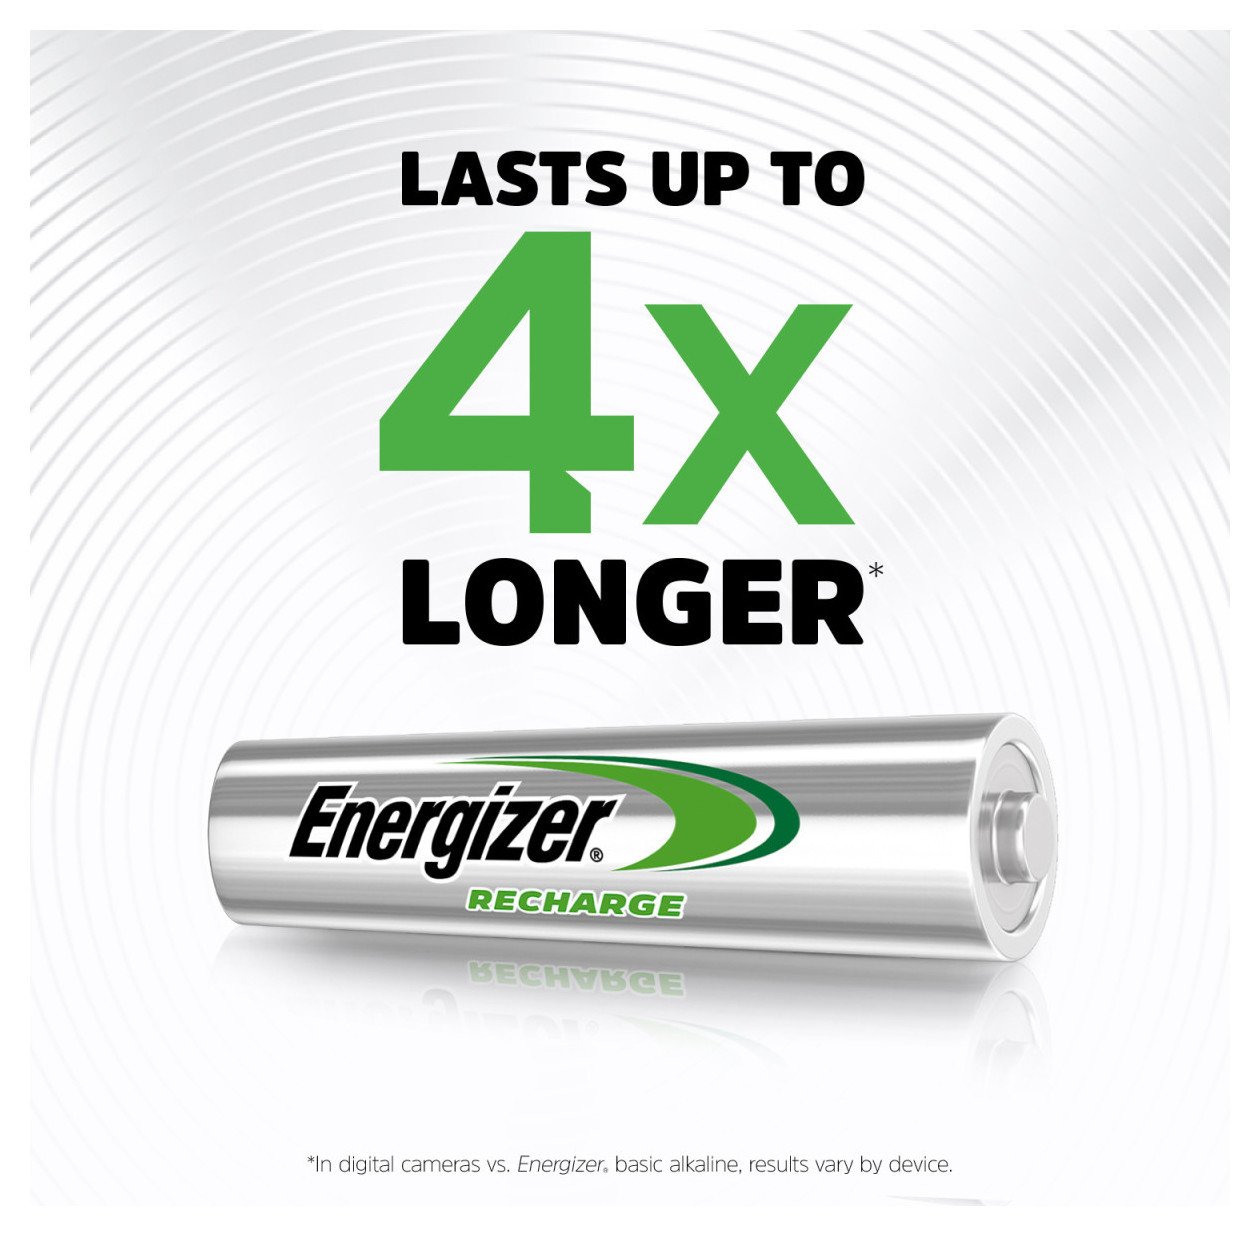 Energizer Rechargeable Power Plus AAA Batteries Review